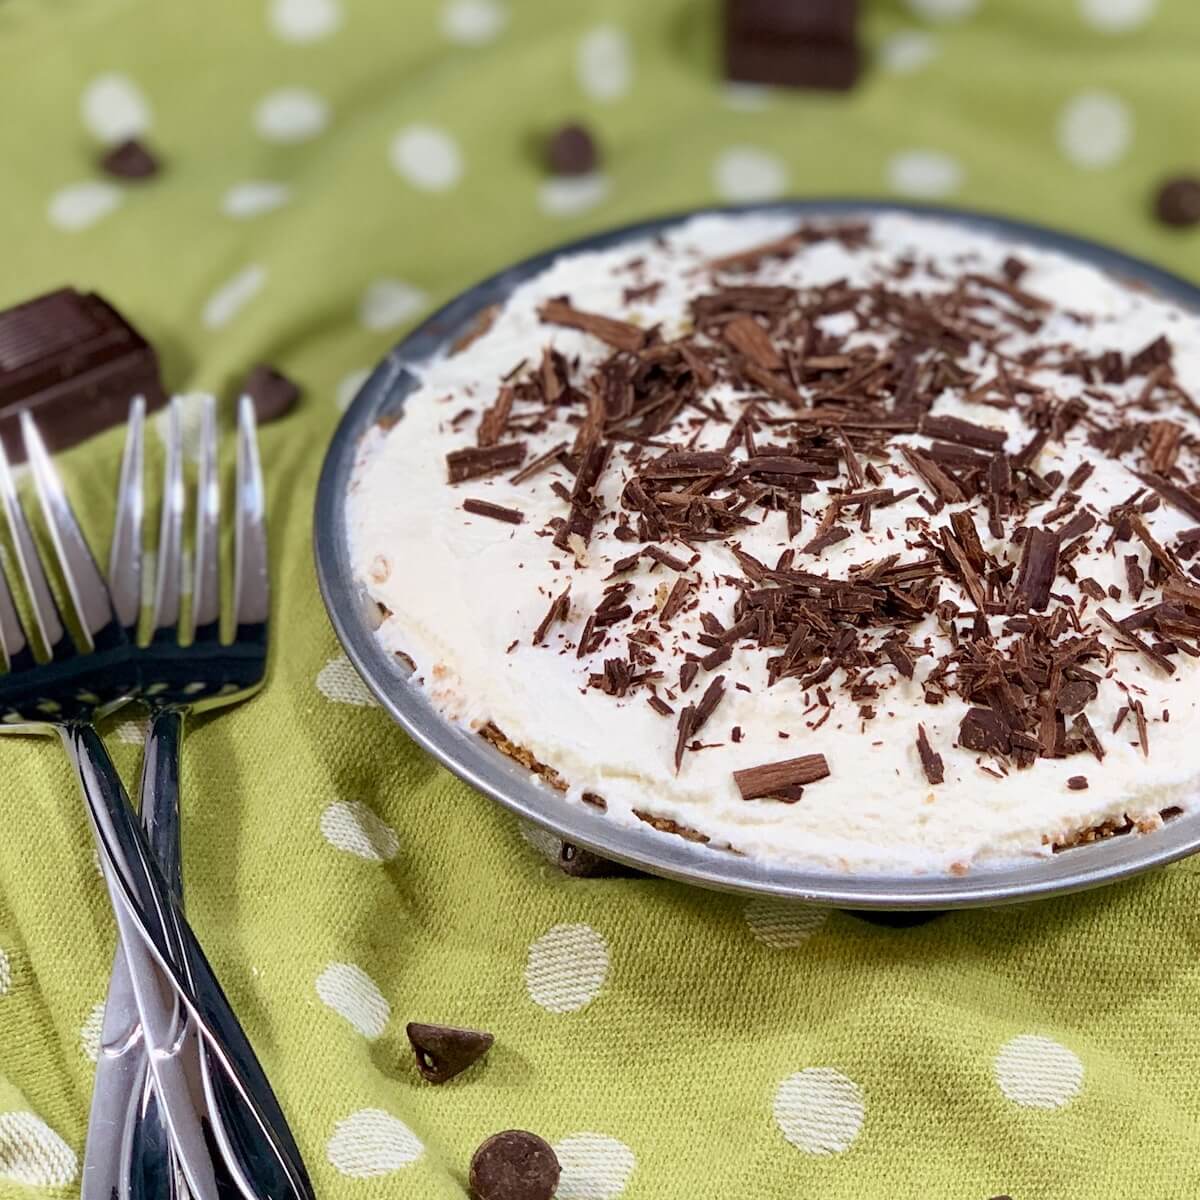 Chocolate Cream Pie with 2 forks surrounded by chocolate on a green polka dot towel.